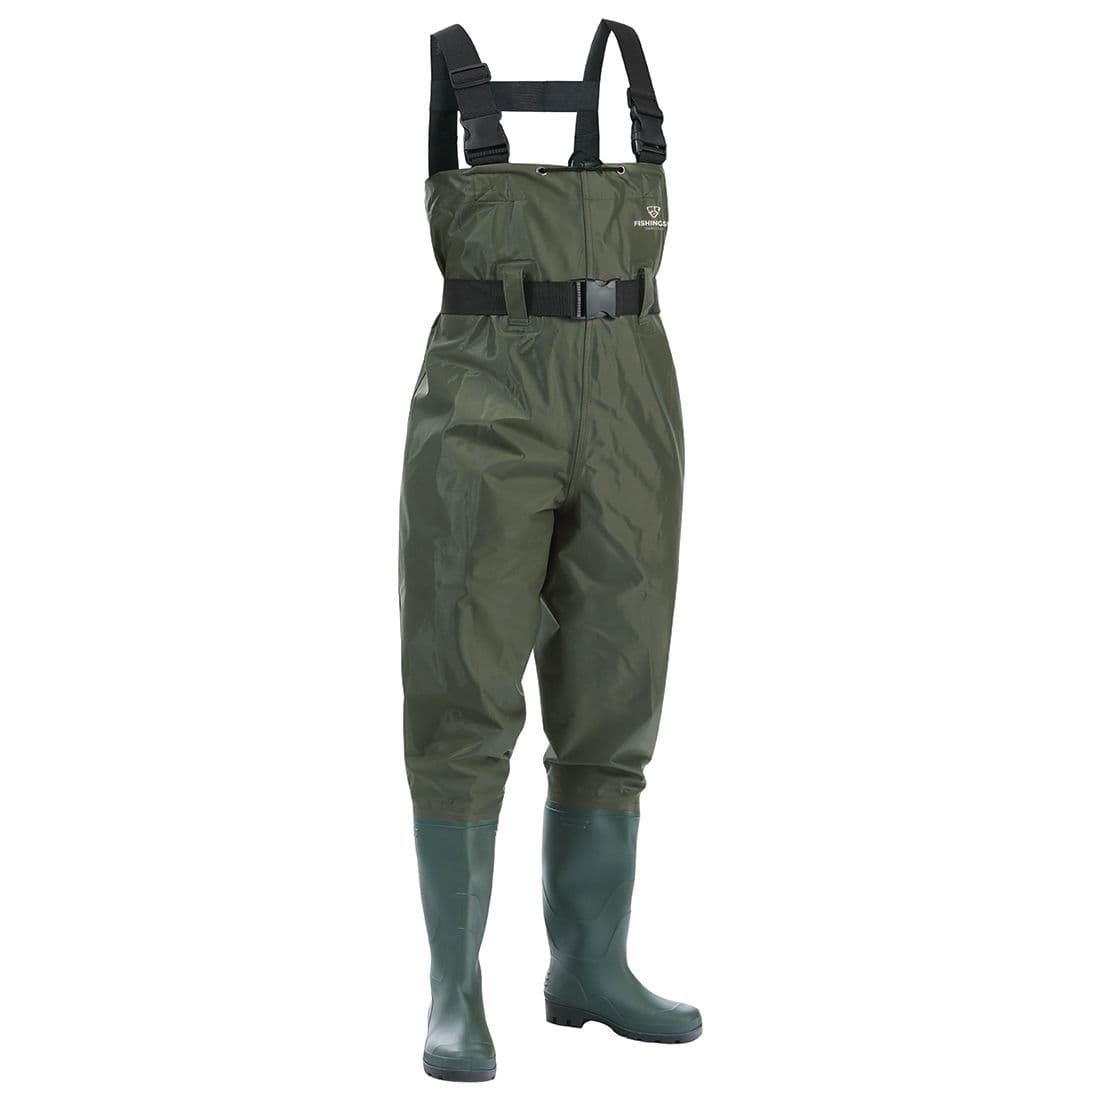 Magreel Child Chest Waders Waterproof Nylon with Boots Fishing for